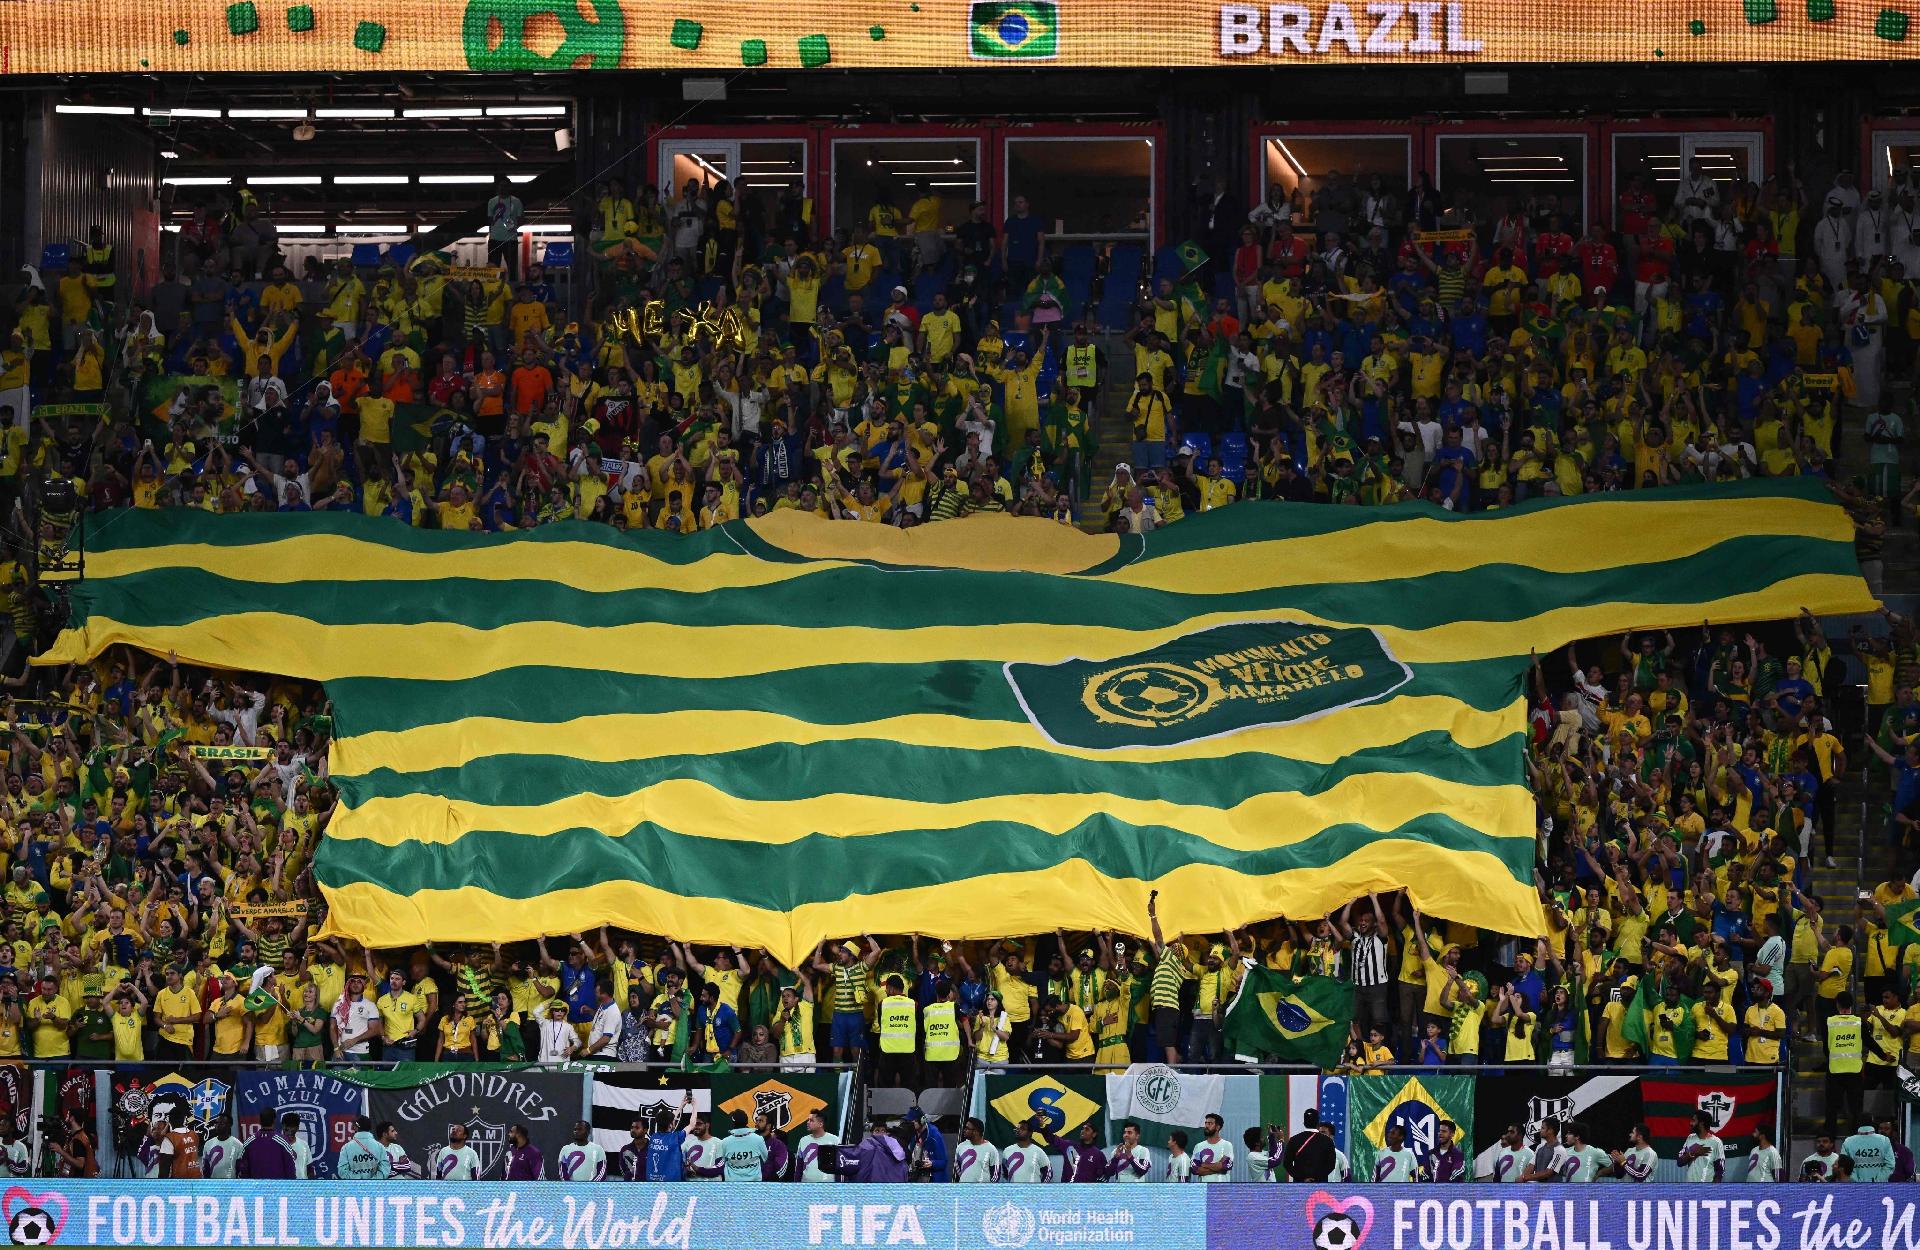 Flag of the Brazilian fans at the 974 stadium - Jewel SAMAD / AFP